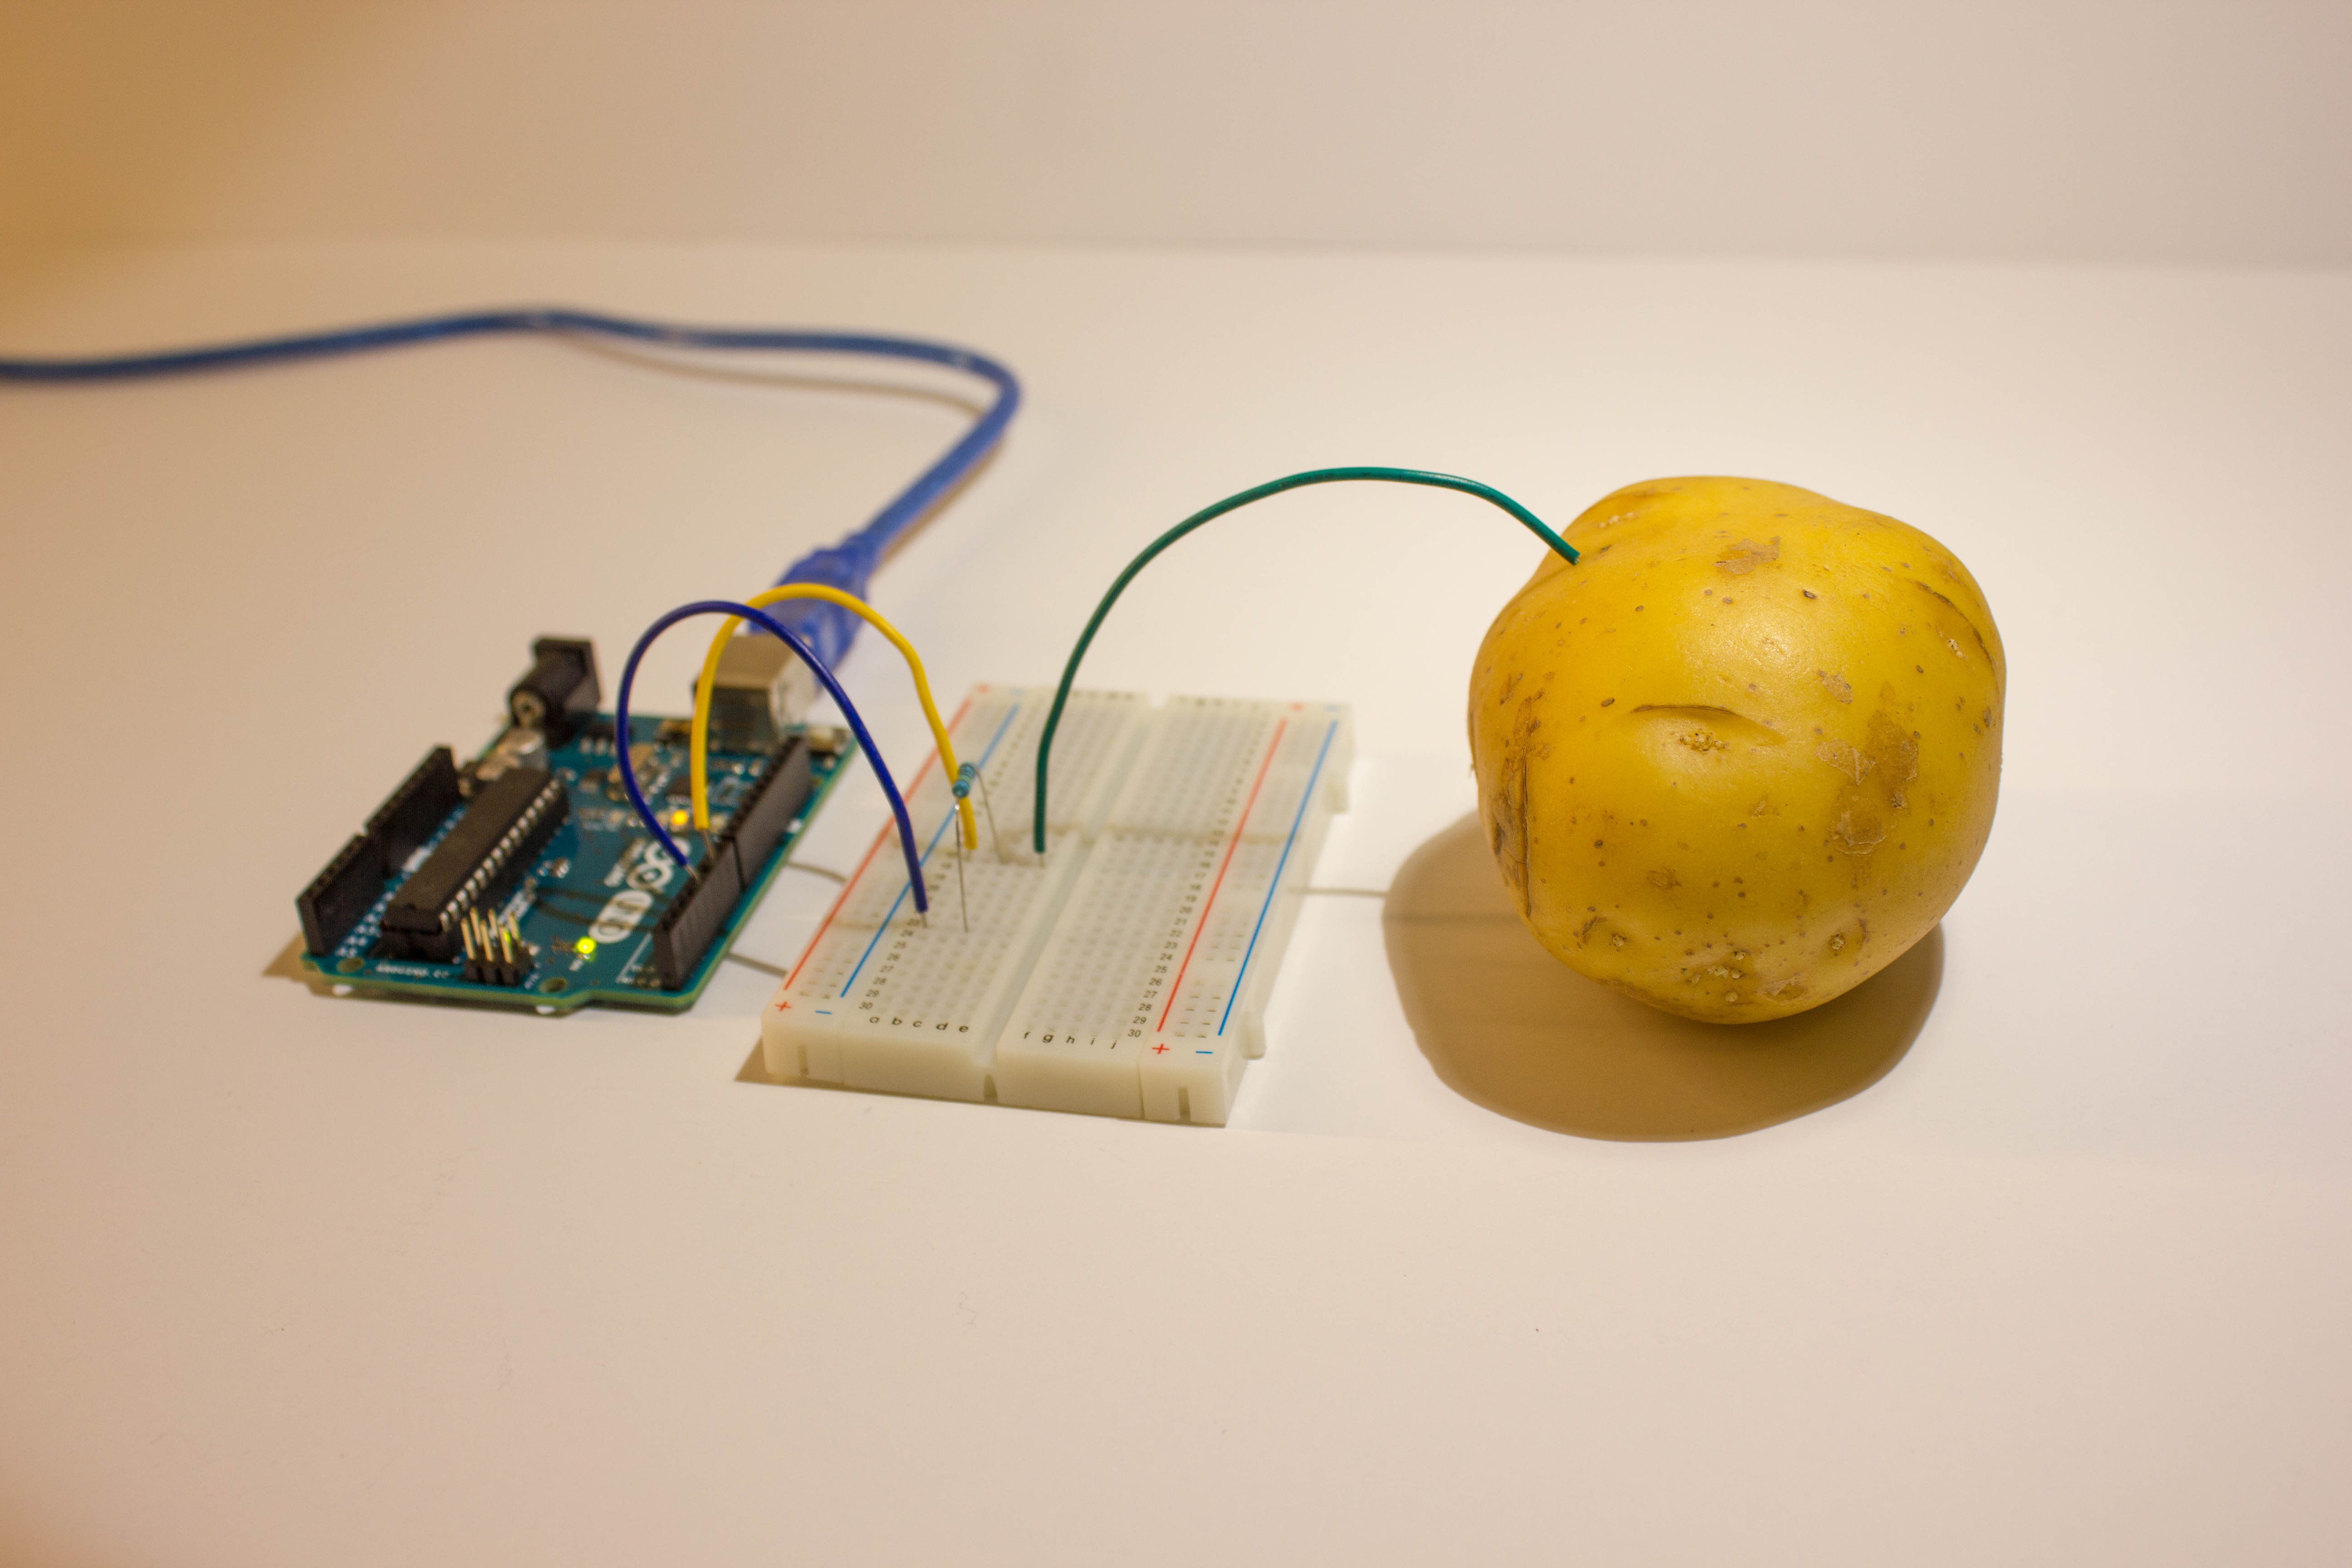 An Arduino hooked up to a potato